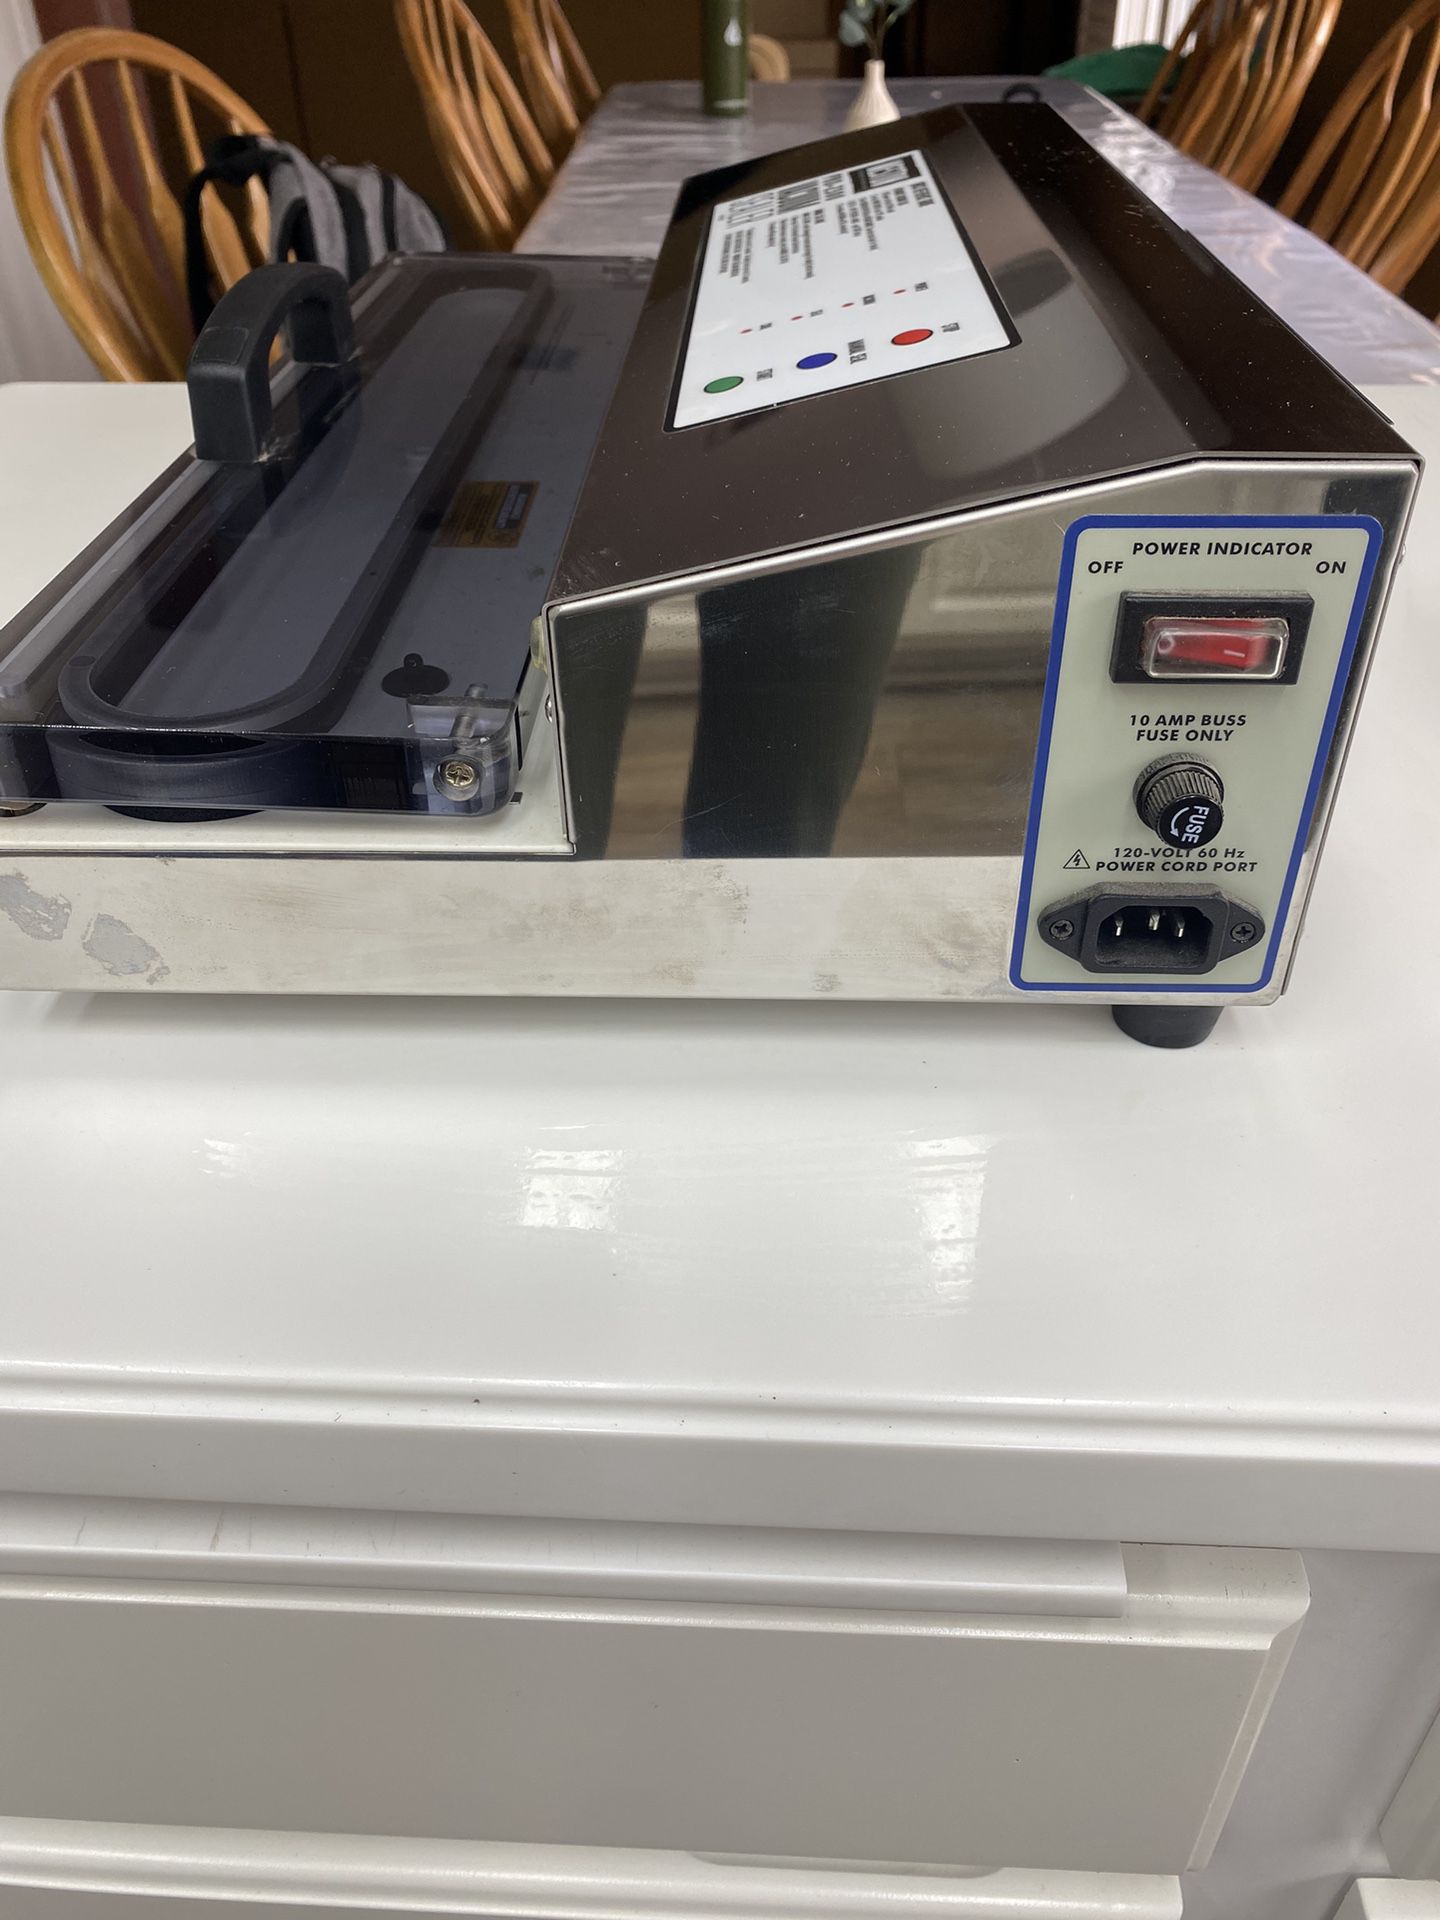 Weston Pro-2100 Vacuum Sealer for Sale in Queens, NY - OfferUp